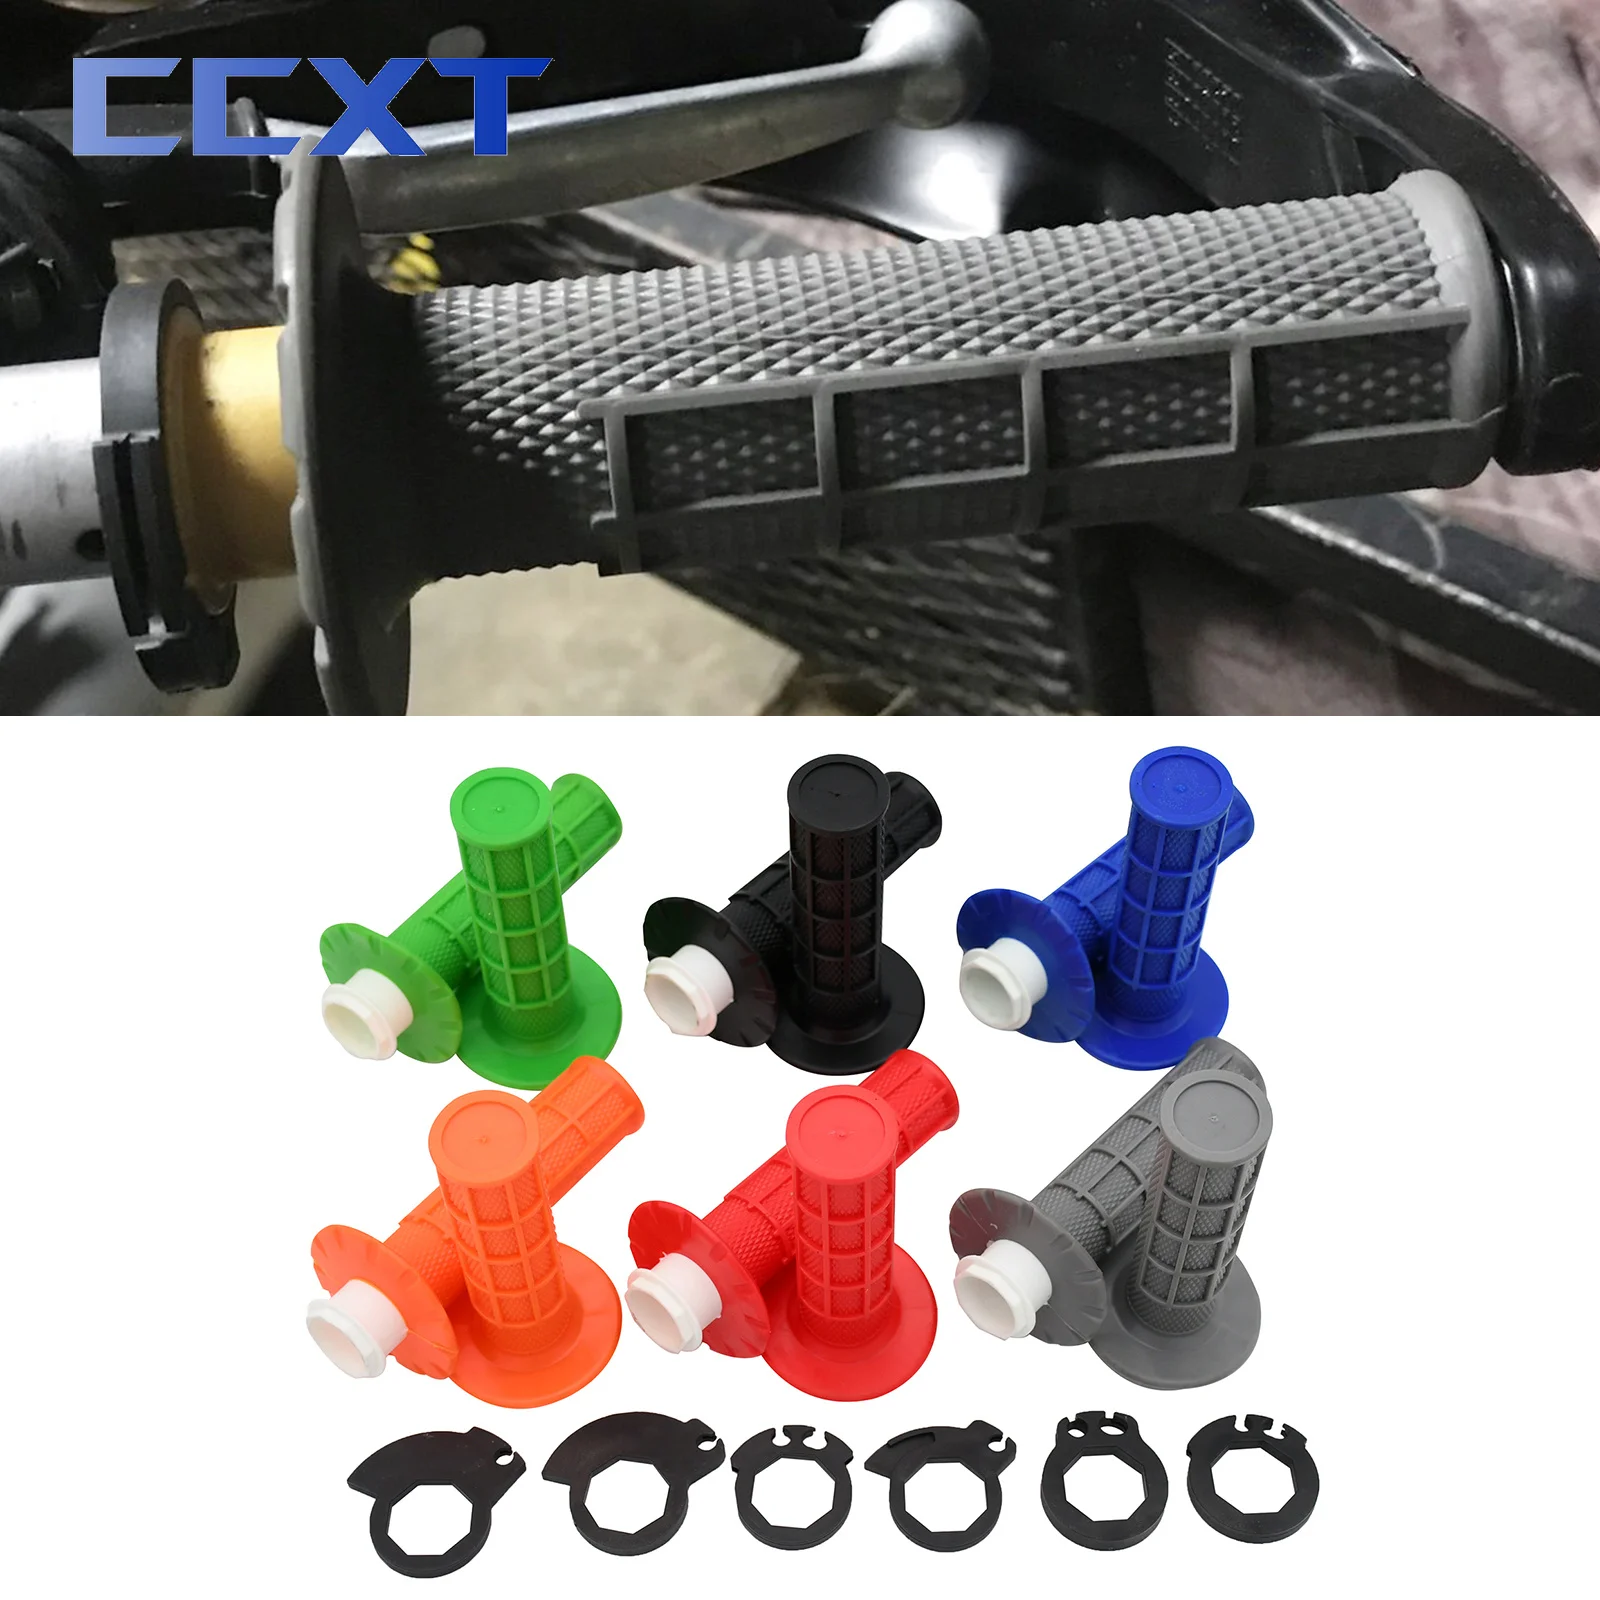 New universal motorcycle 7 8 handlebar grip brake handle rubber the snap on cam for exc thumb200